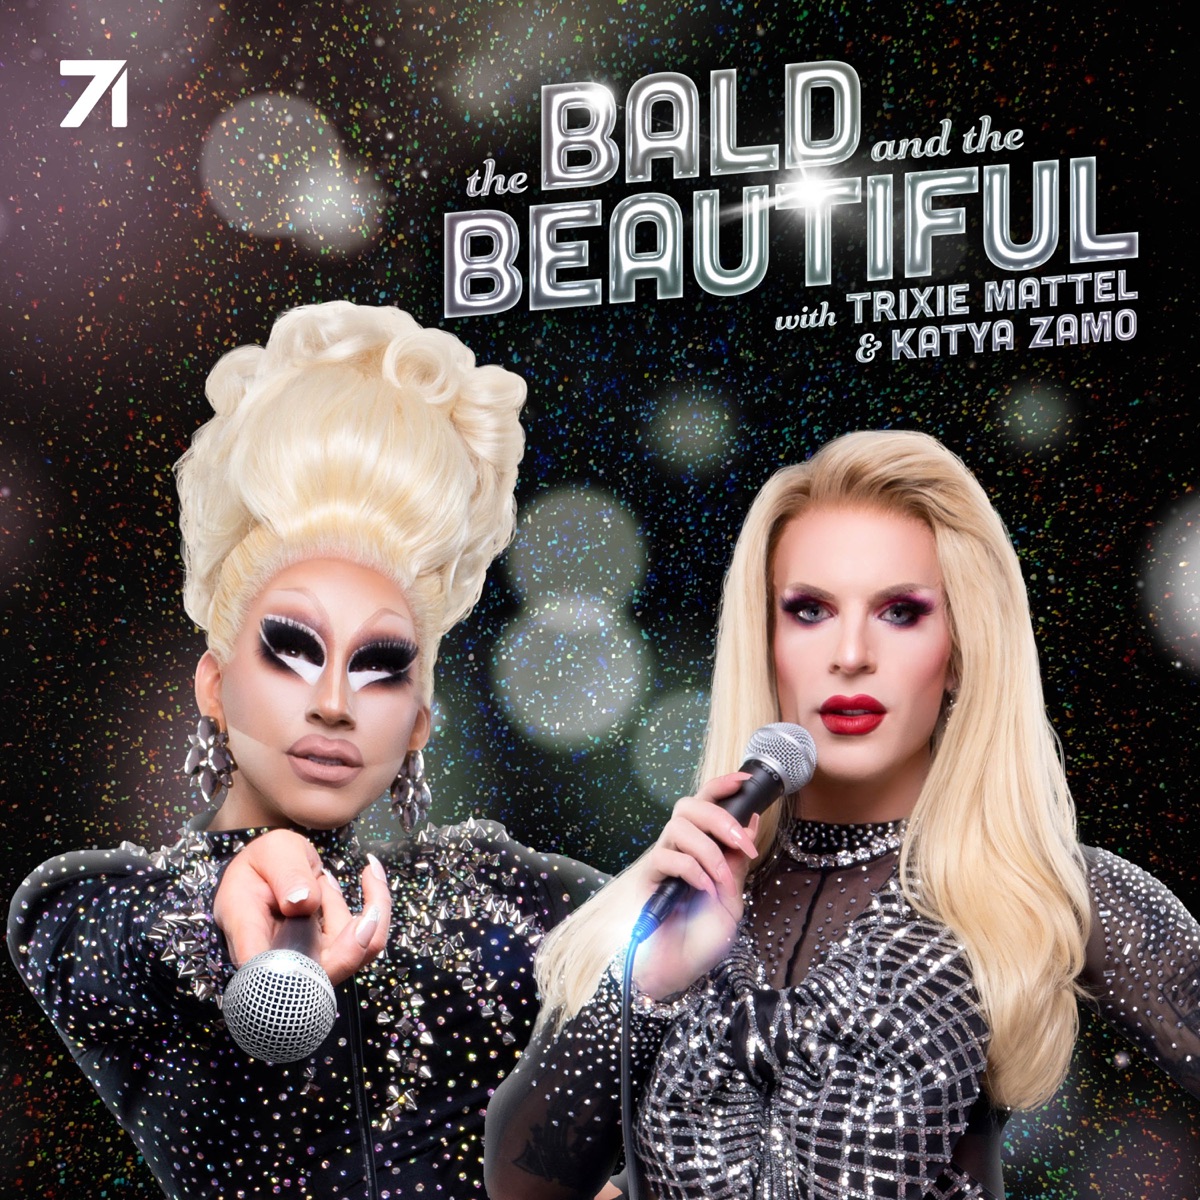 New Sex Prova - The Bald and the Beautiful with Trixie Mattel and Katya Zamo â€“ Lyssna hÃ¤r â€“  Podtail